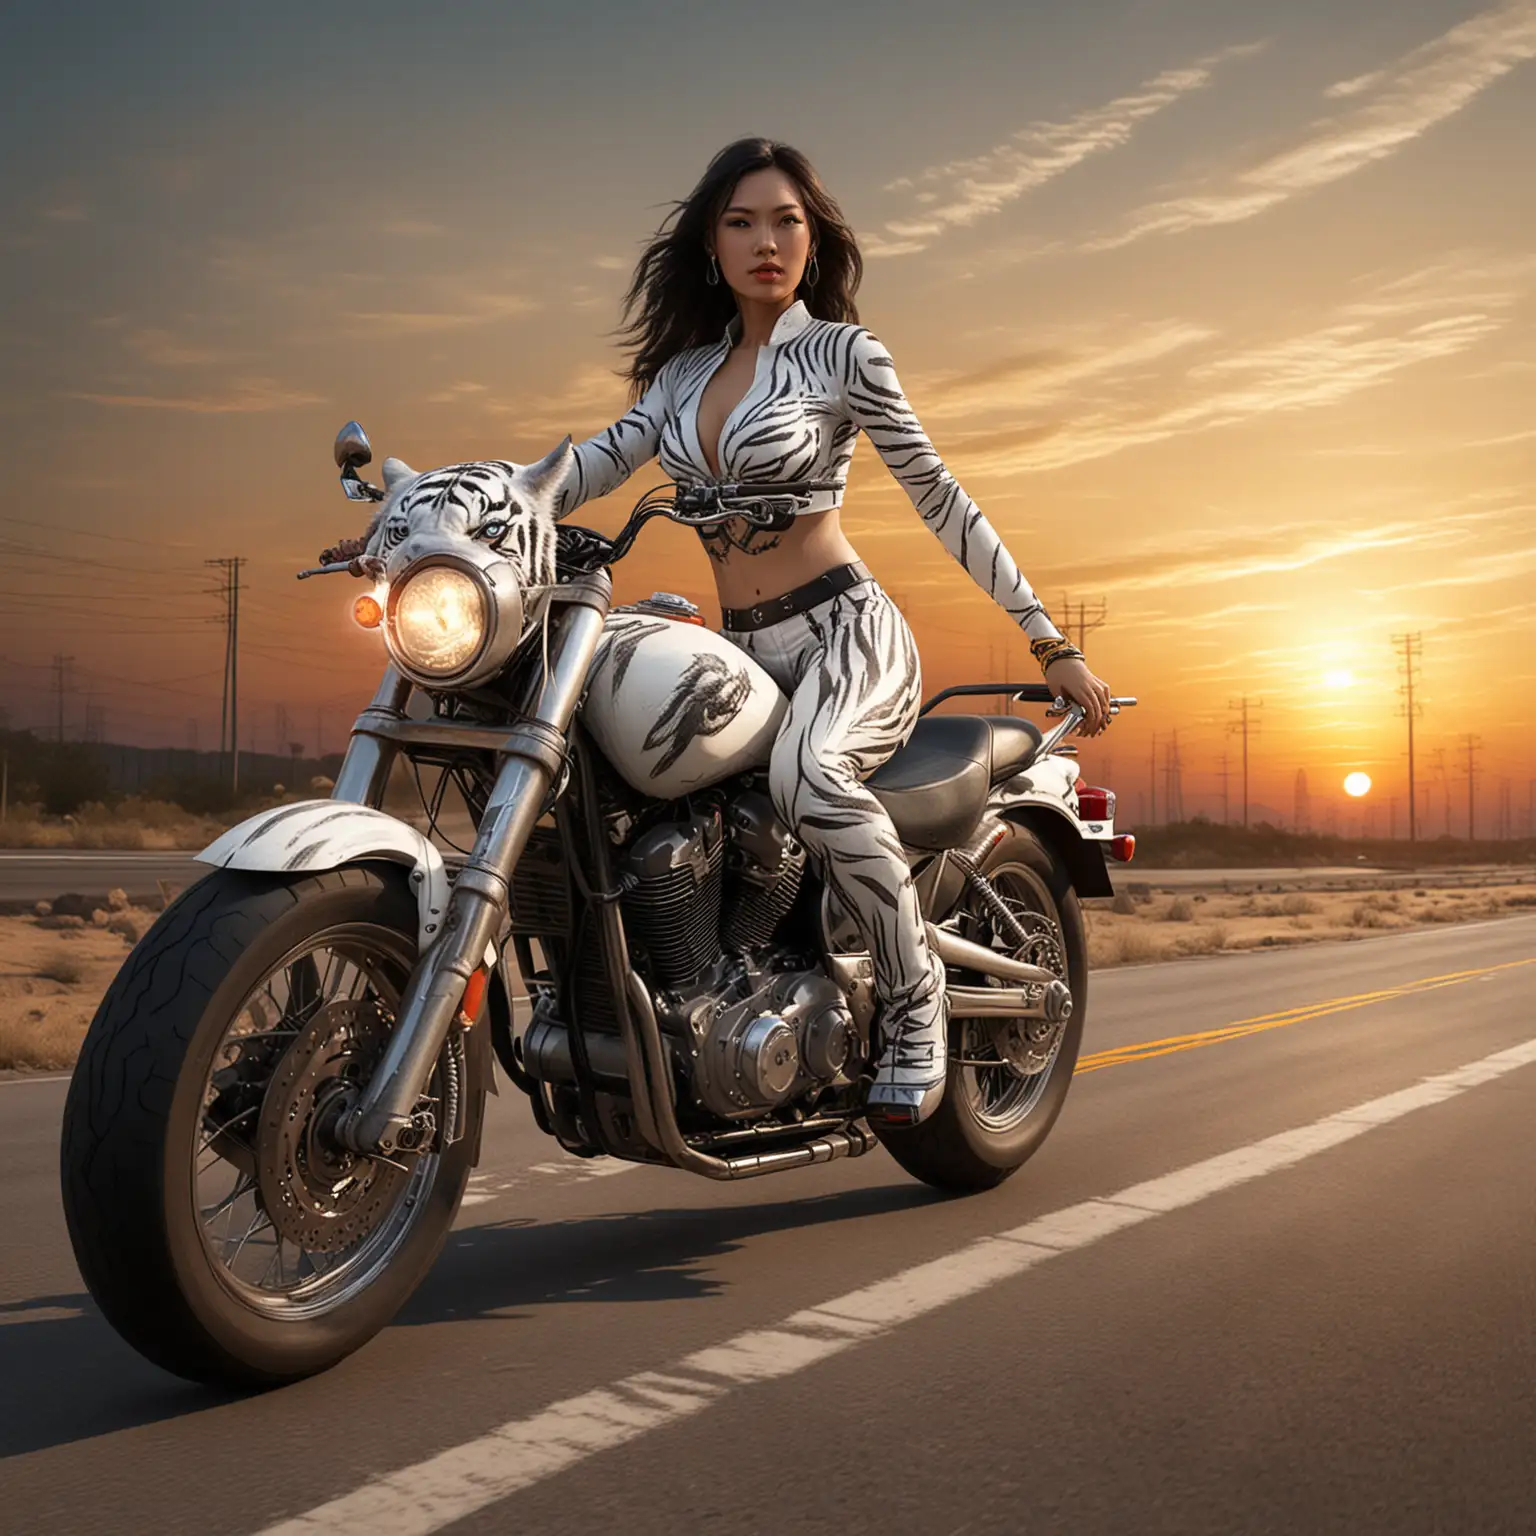 photo realistic, full body. asian woman, body painted as a white tiger, human head, riding a real chopper motorcycle, interstate lane, panoramic road, sunset